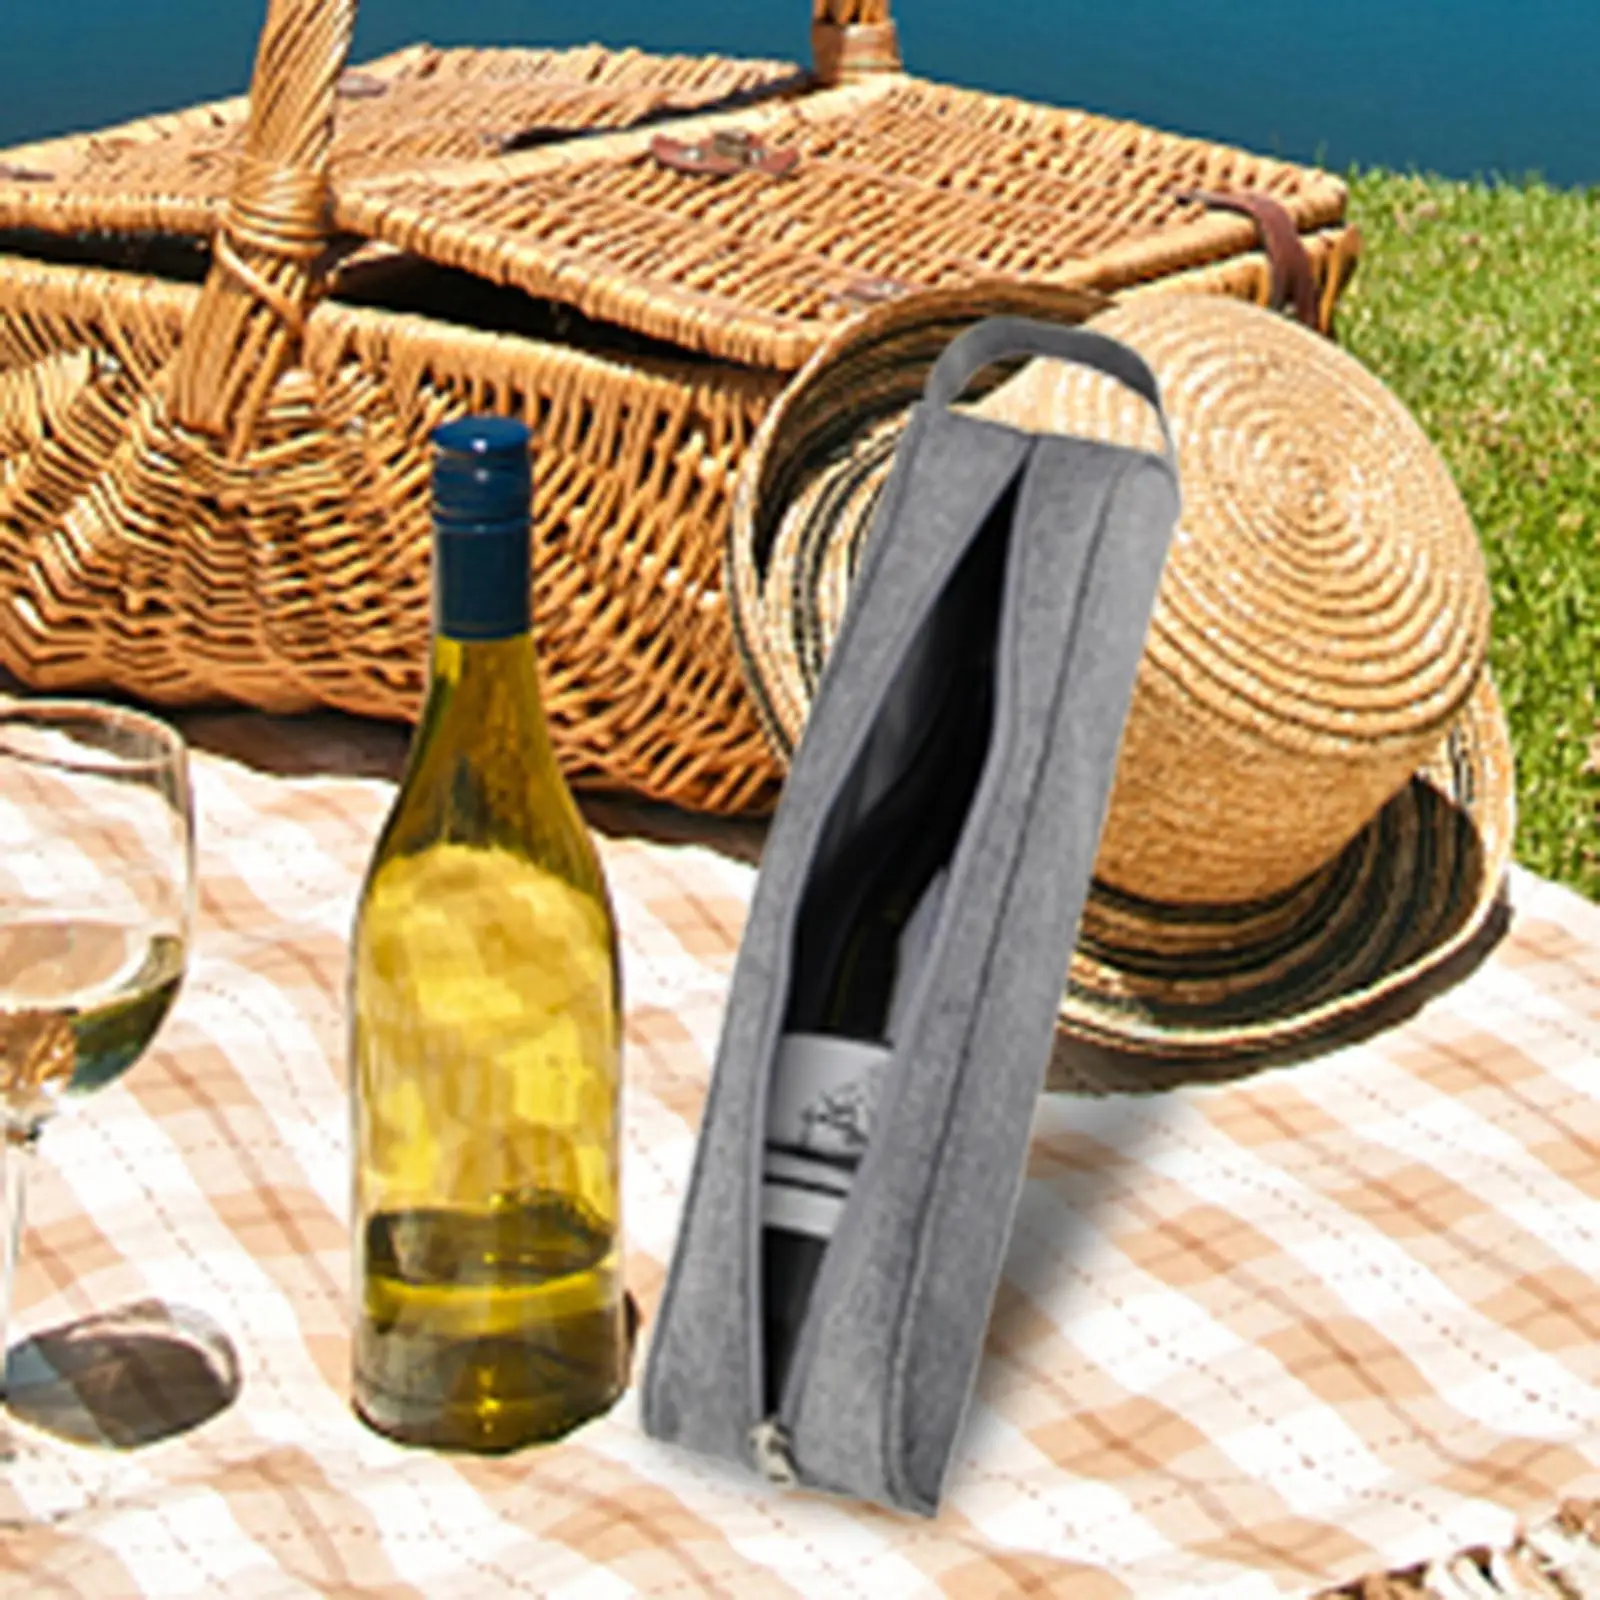 Single Bottle Wine Tote Bag Protective Wine Cooler with Handle Wine Cooler Bag Bag for Beach Camping Outdoor Picnic Travel